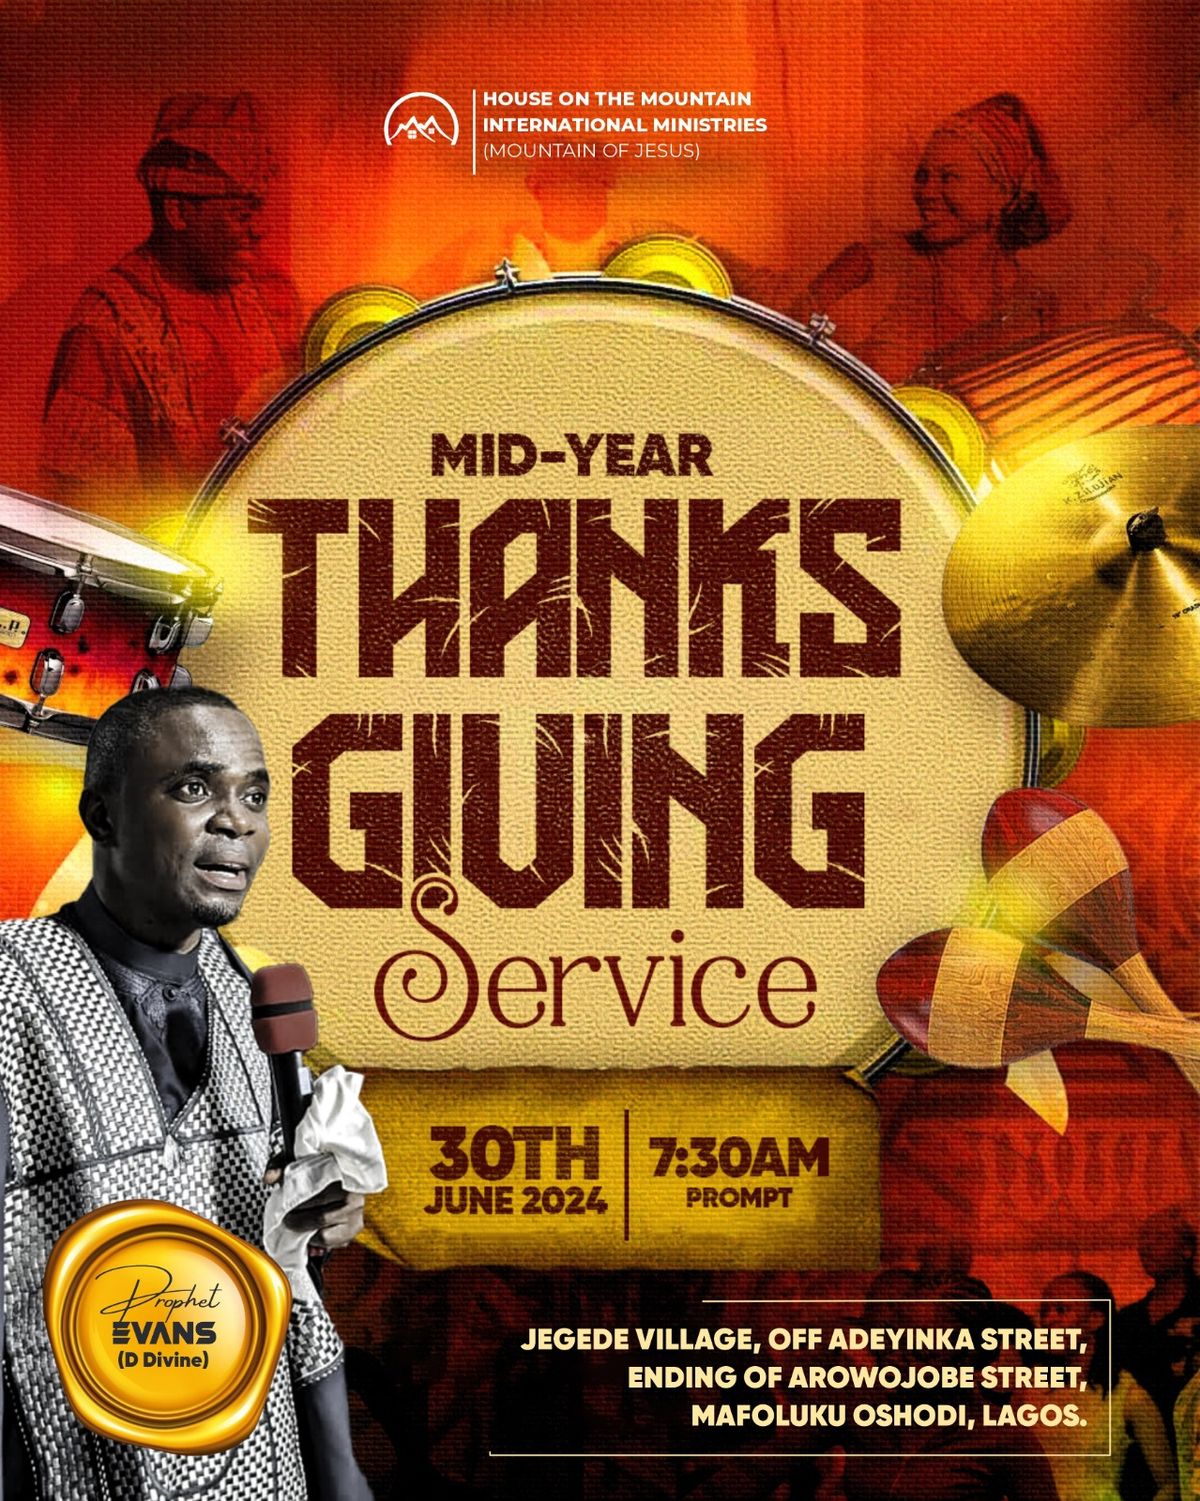 MID-YEAR THANKSGIVING SERVICE  with Prophet Evans D' Divine!!!